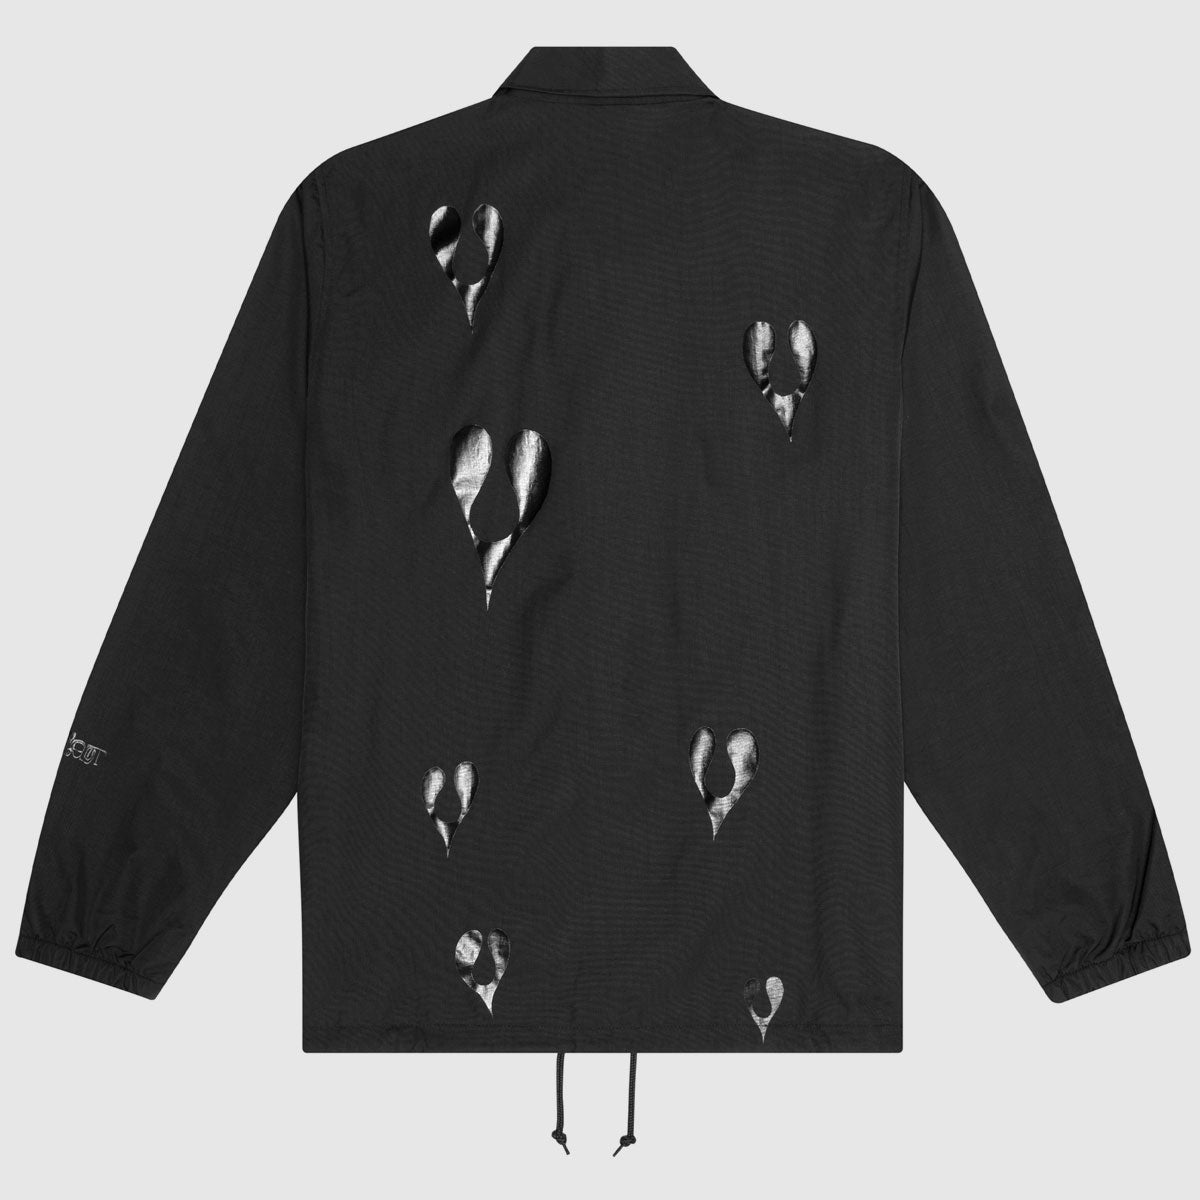 HUF x Phil Frost Coaches Jacket